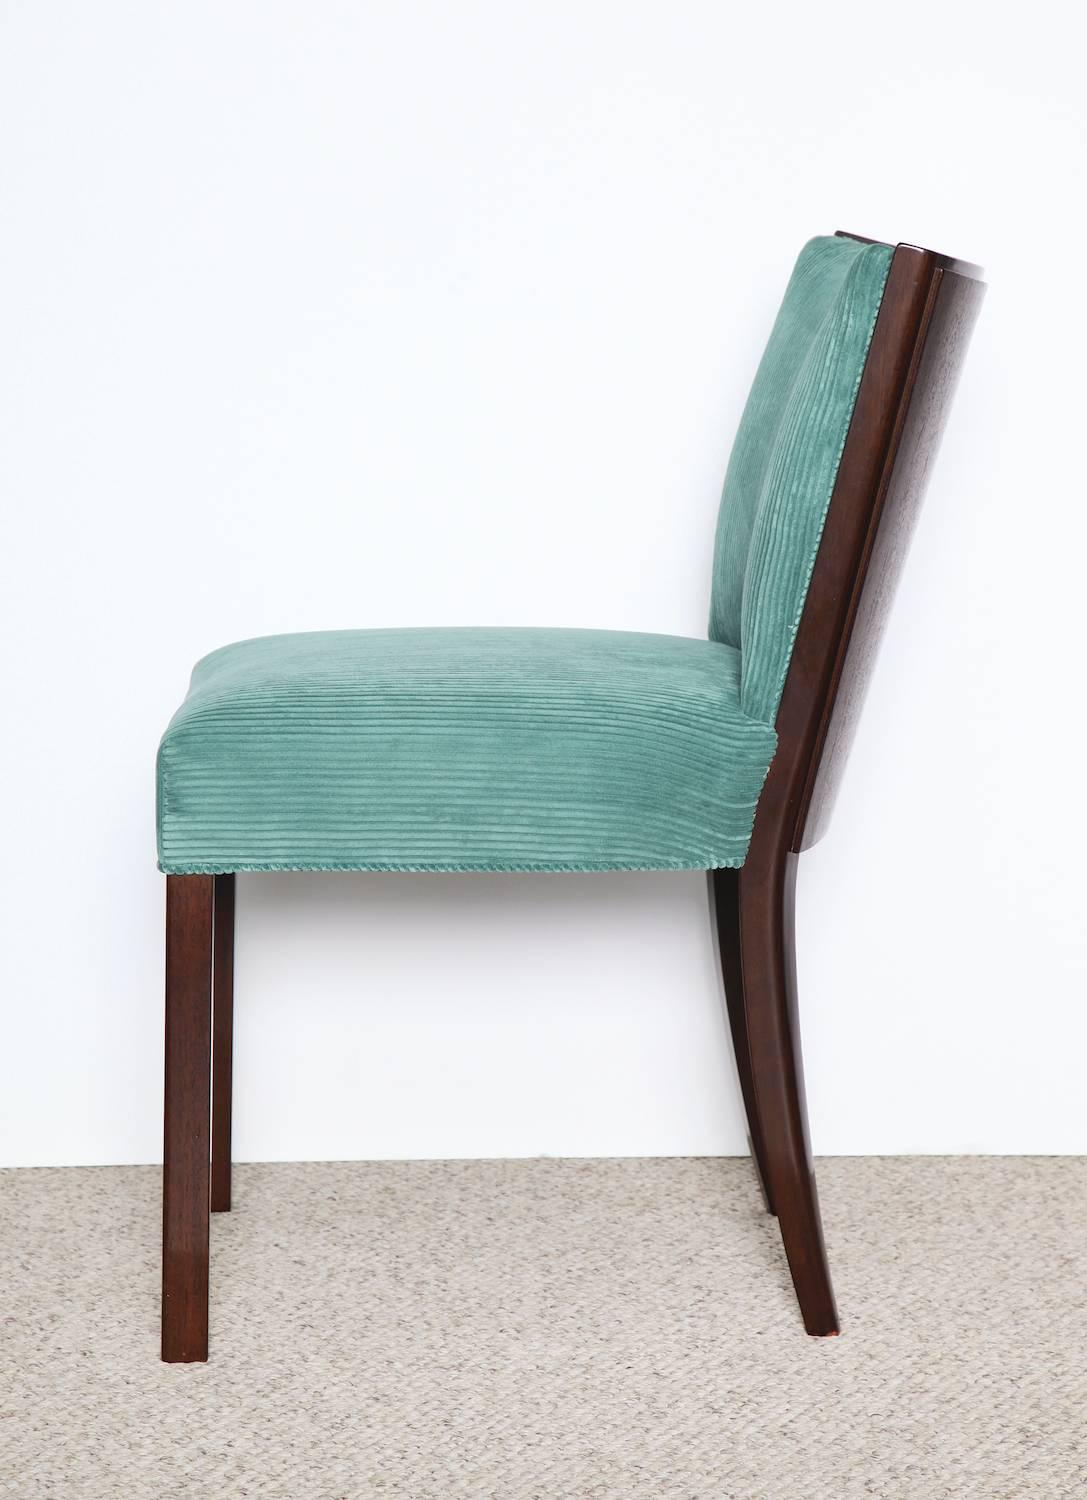 Paul Laszlo Chair In Excellent Condition For Sale In New York, NY